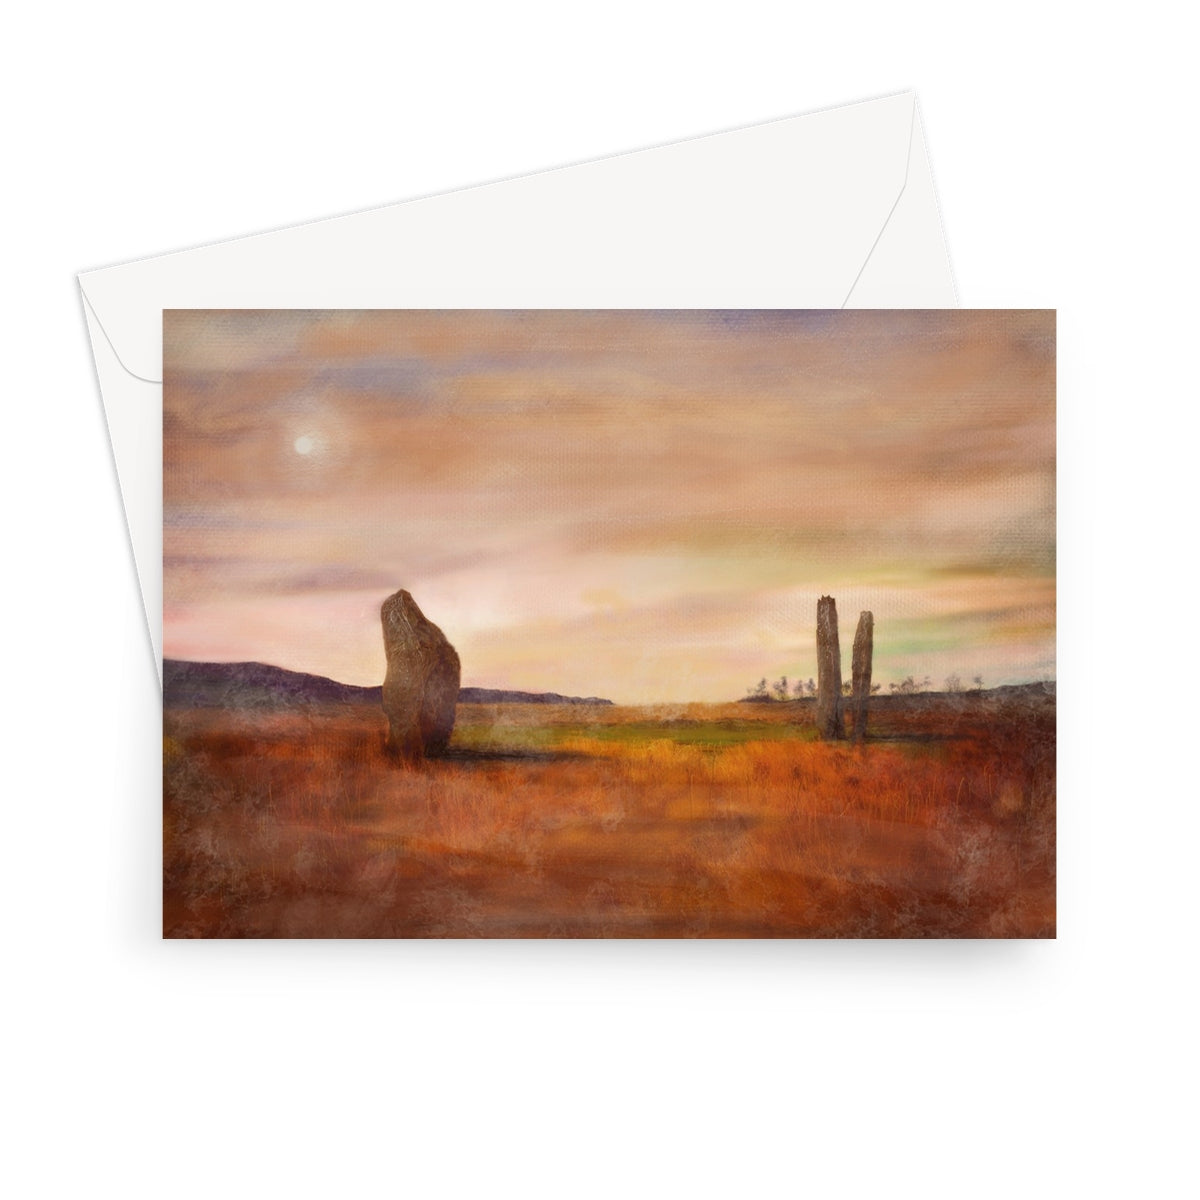 Machrie Moor Arran Art Gifts Greeting Card-Greetings Cards-Arran Art Gallery-7"x5"-10 Cards-Paintings, Prints, Homeware, Art Gifts From Scotland By Scottish Artist Kevin Hunter